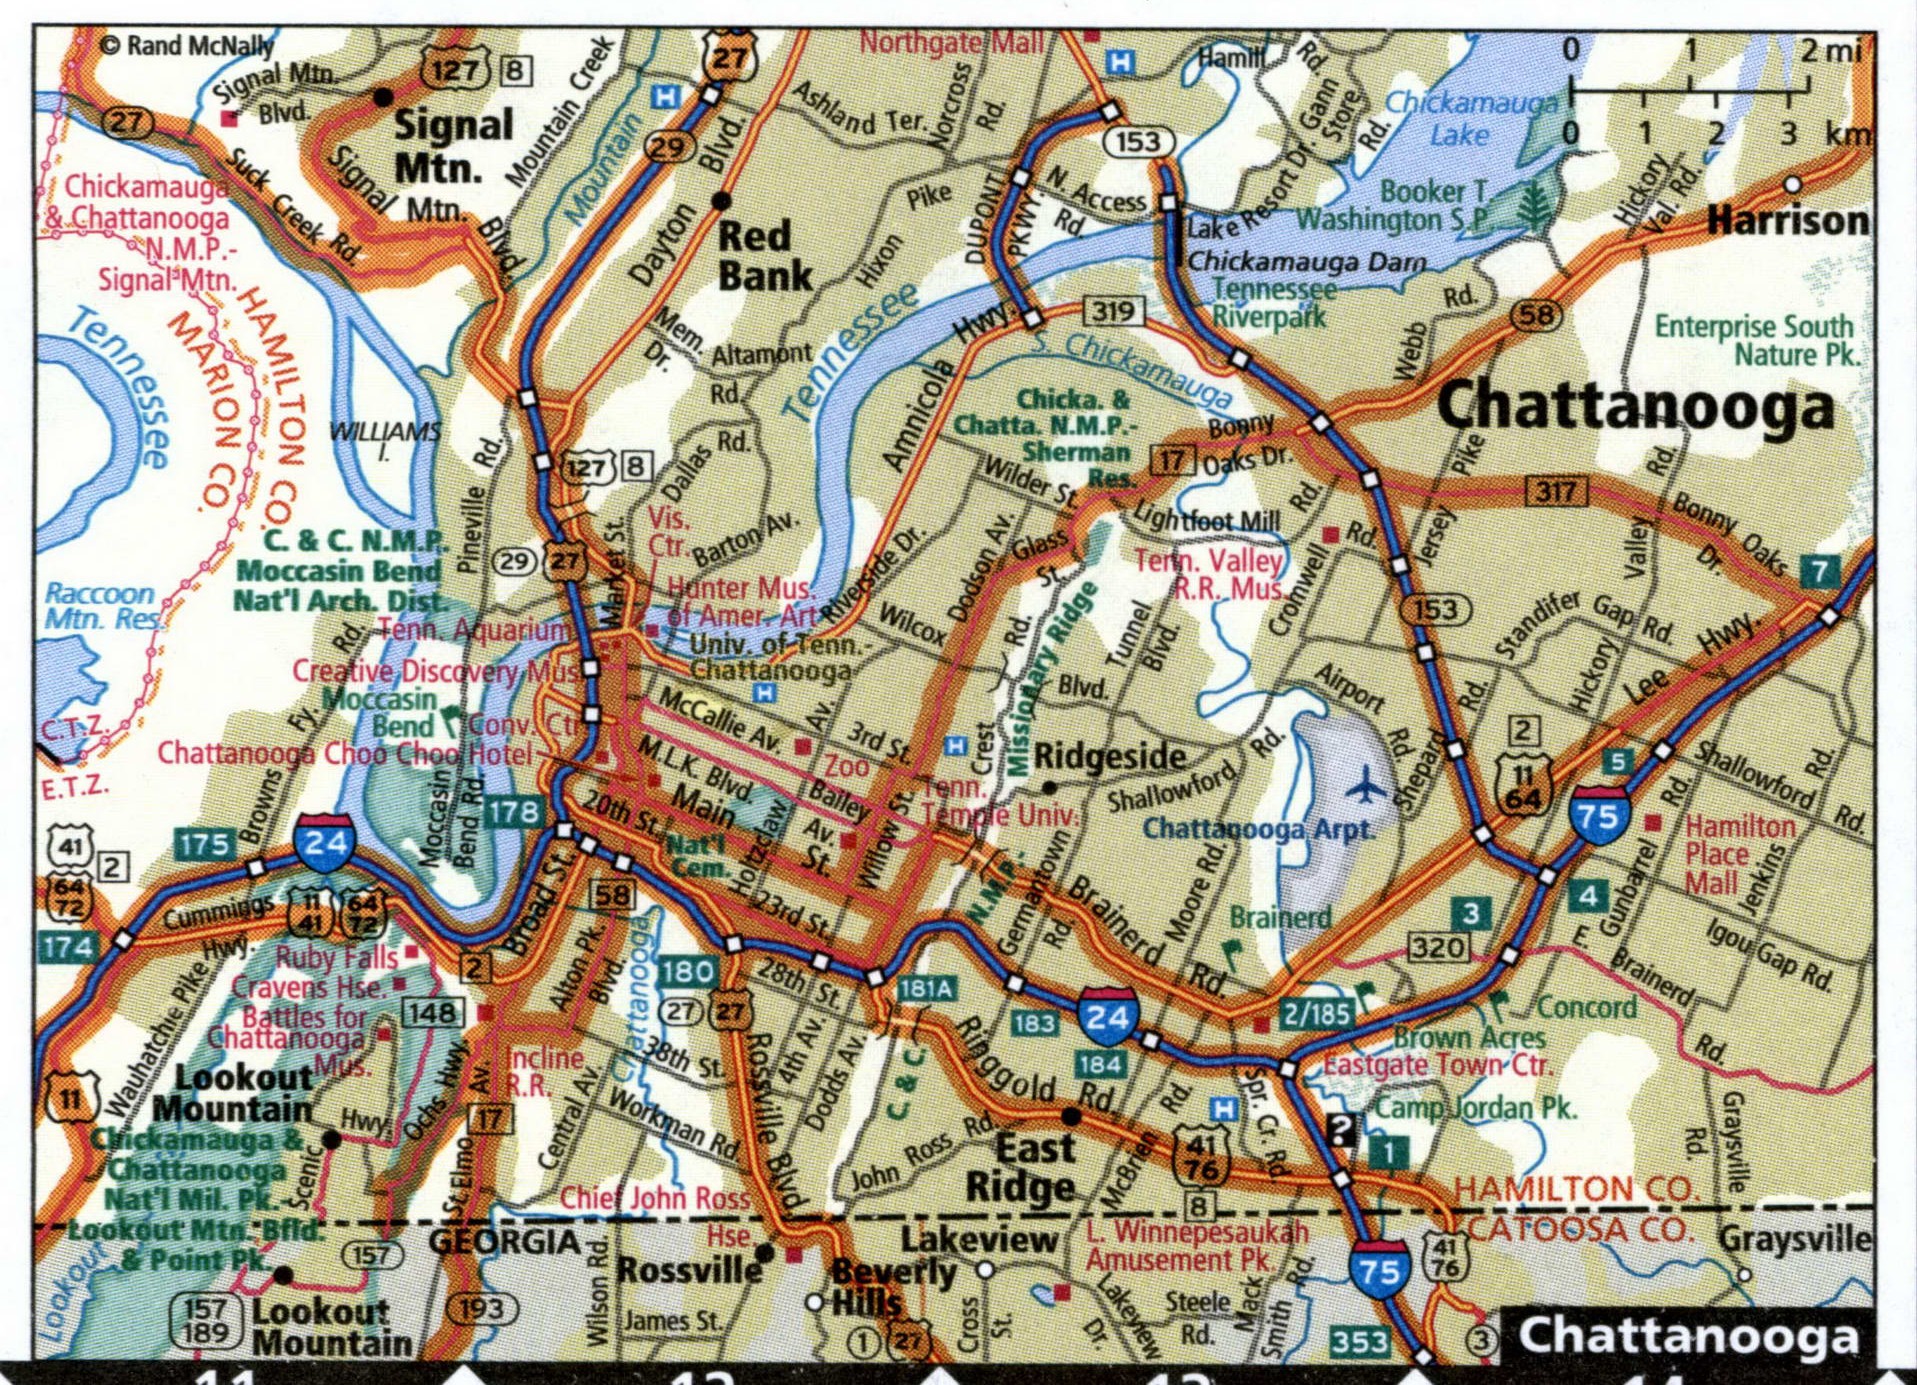 Chattanooga city map for truckers